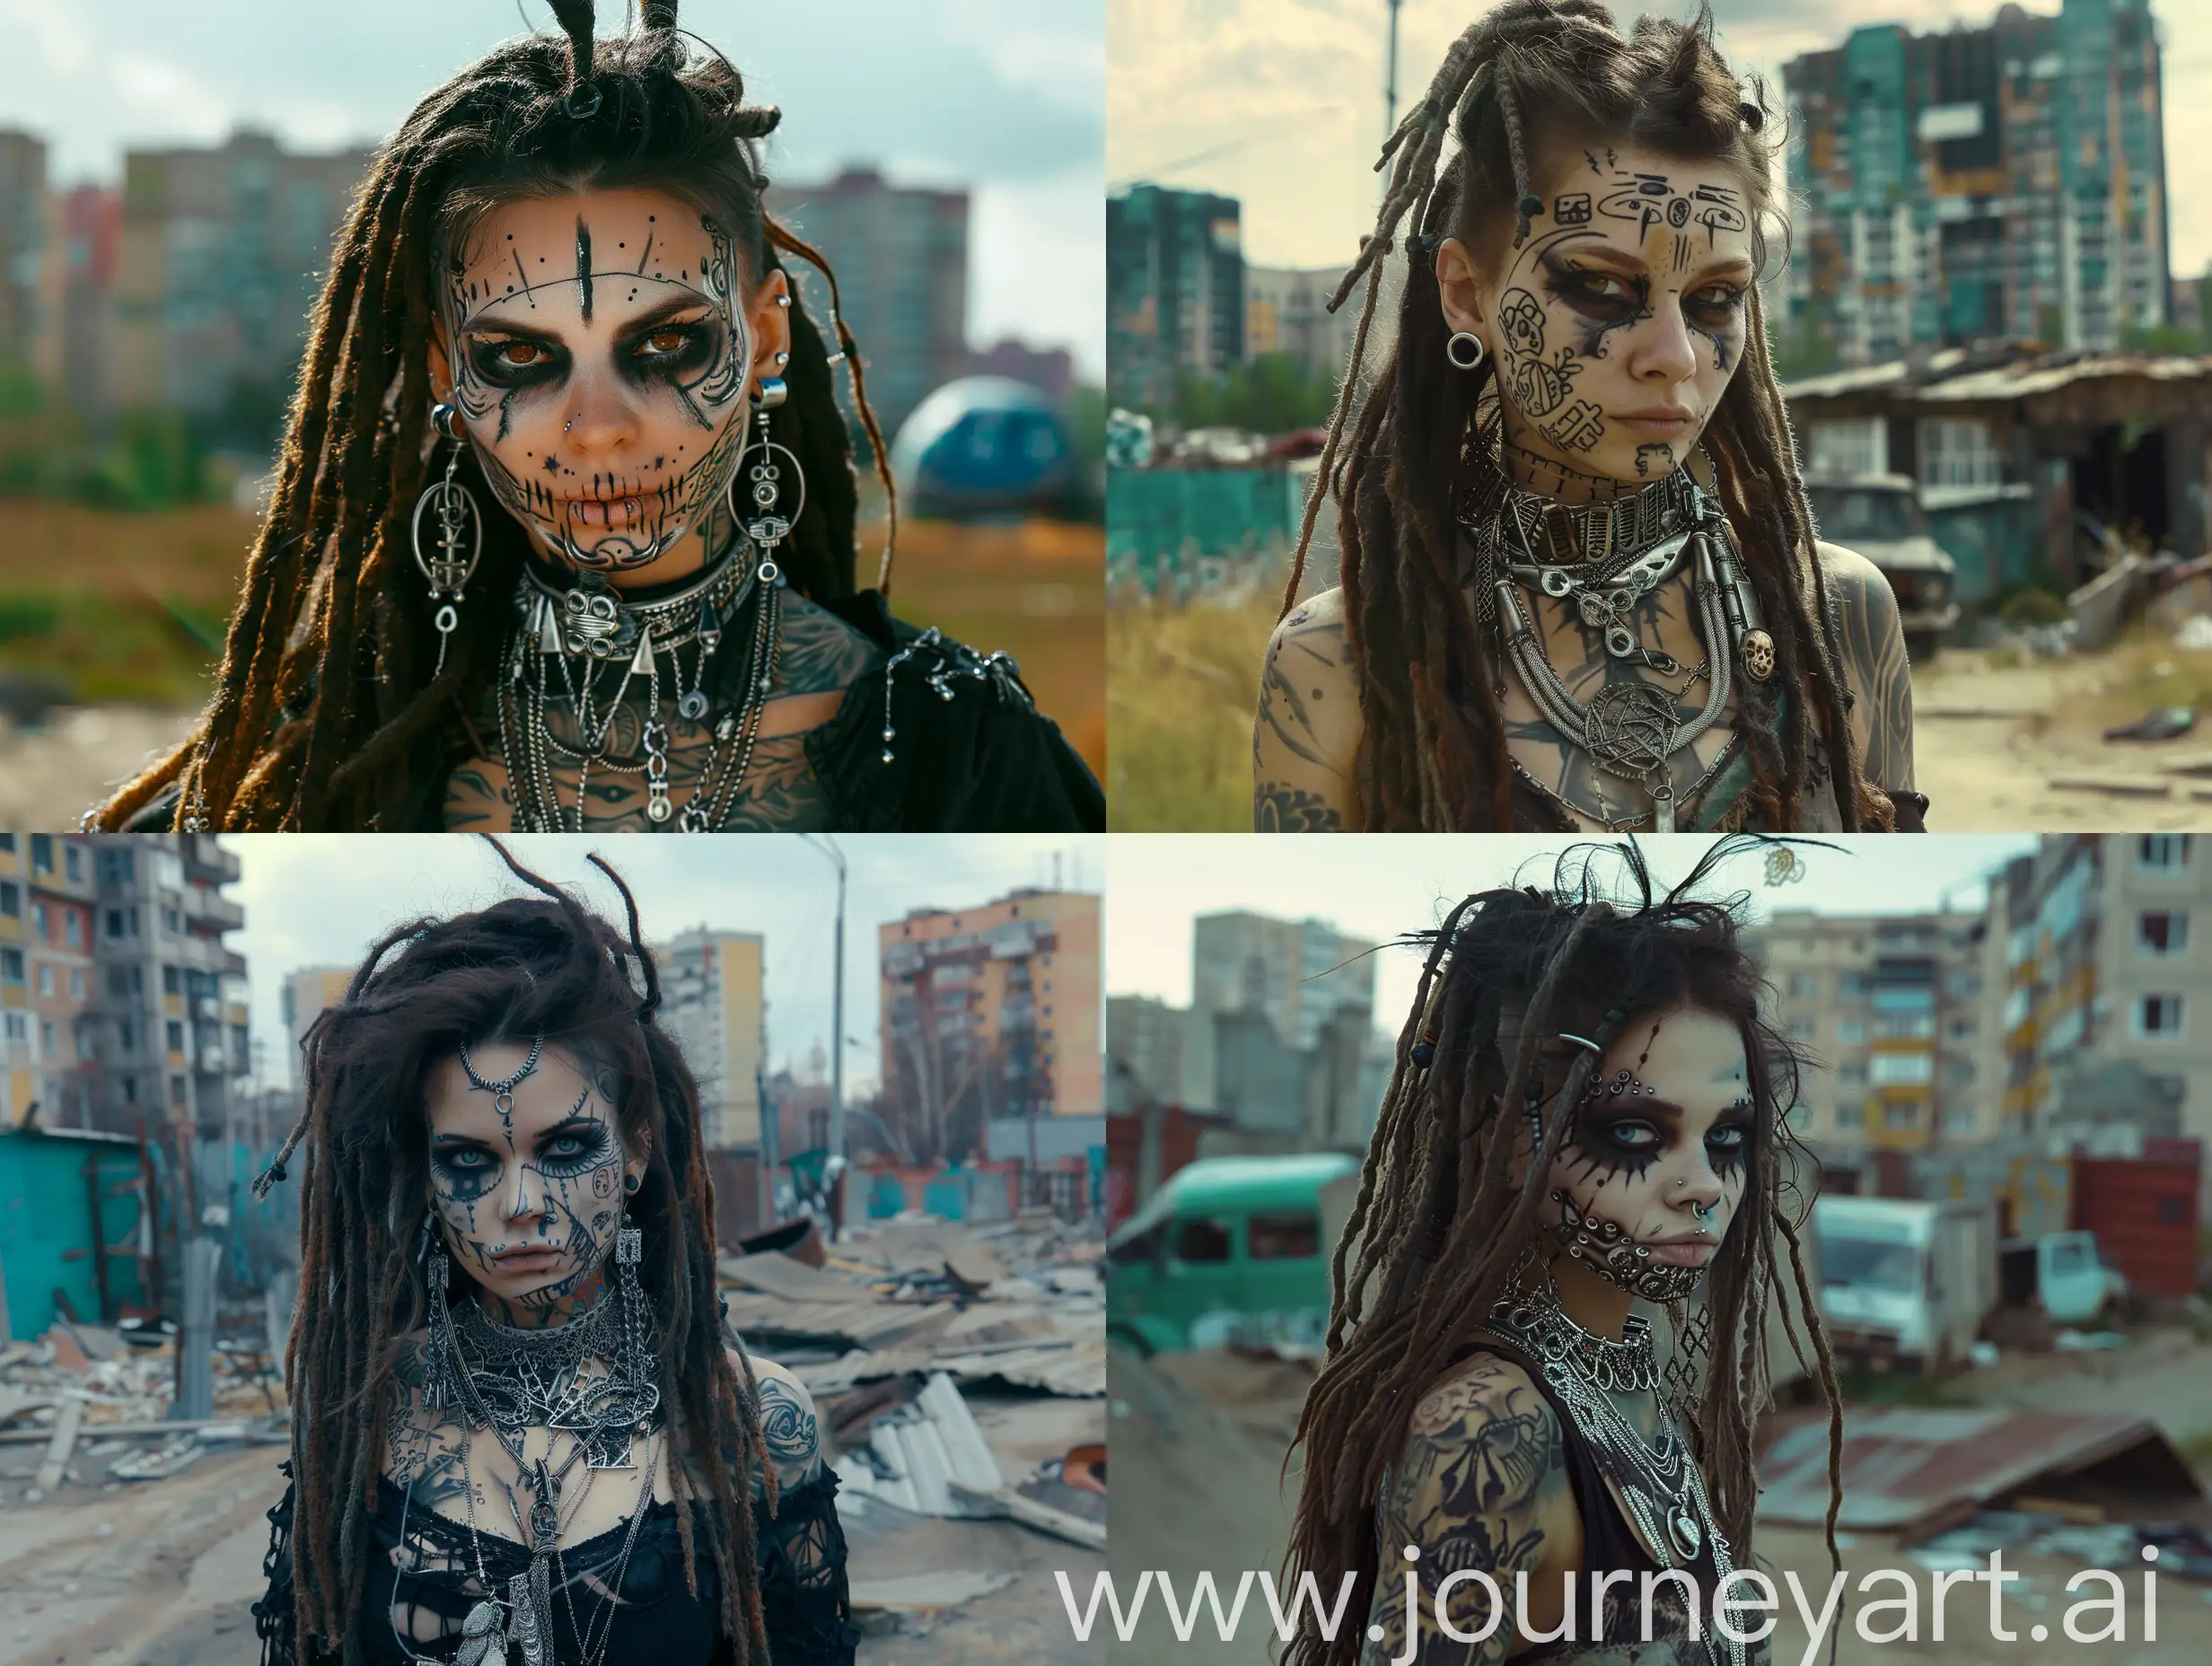 young female necromancer with detailed facial tattoos, intricate silver jewelry, longest brunette dreadlocks, goth freak, post-apocalyptic. scene from dark urban fantasy horror movie shot on Svema film, 1980s Moscow in background, in style of Aleksei Balabanov, unrated